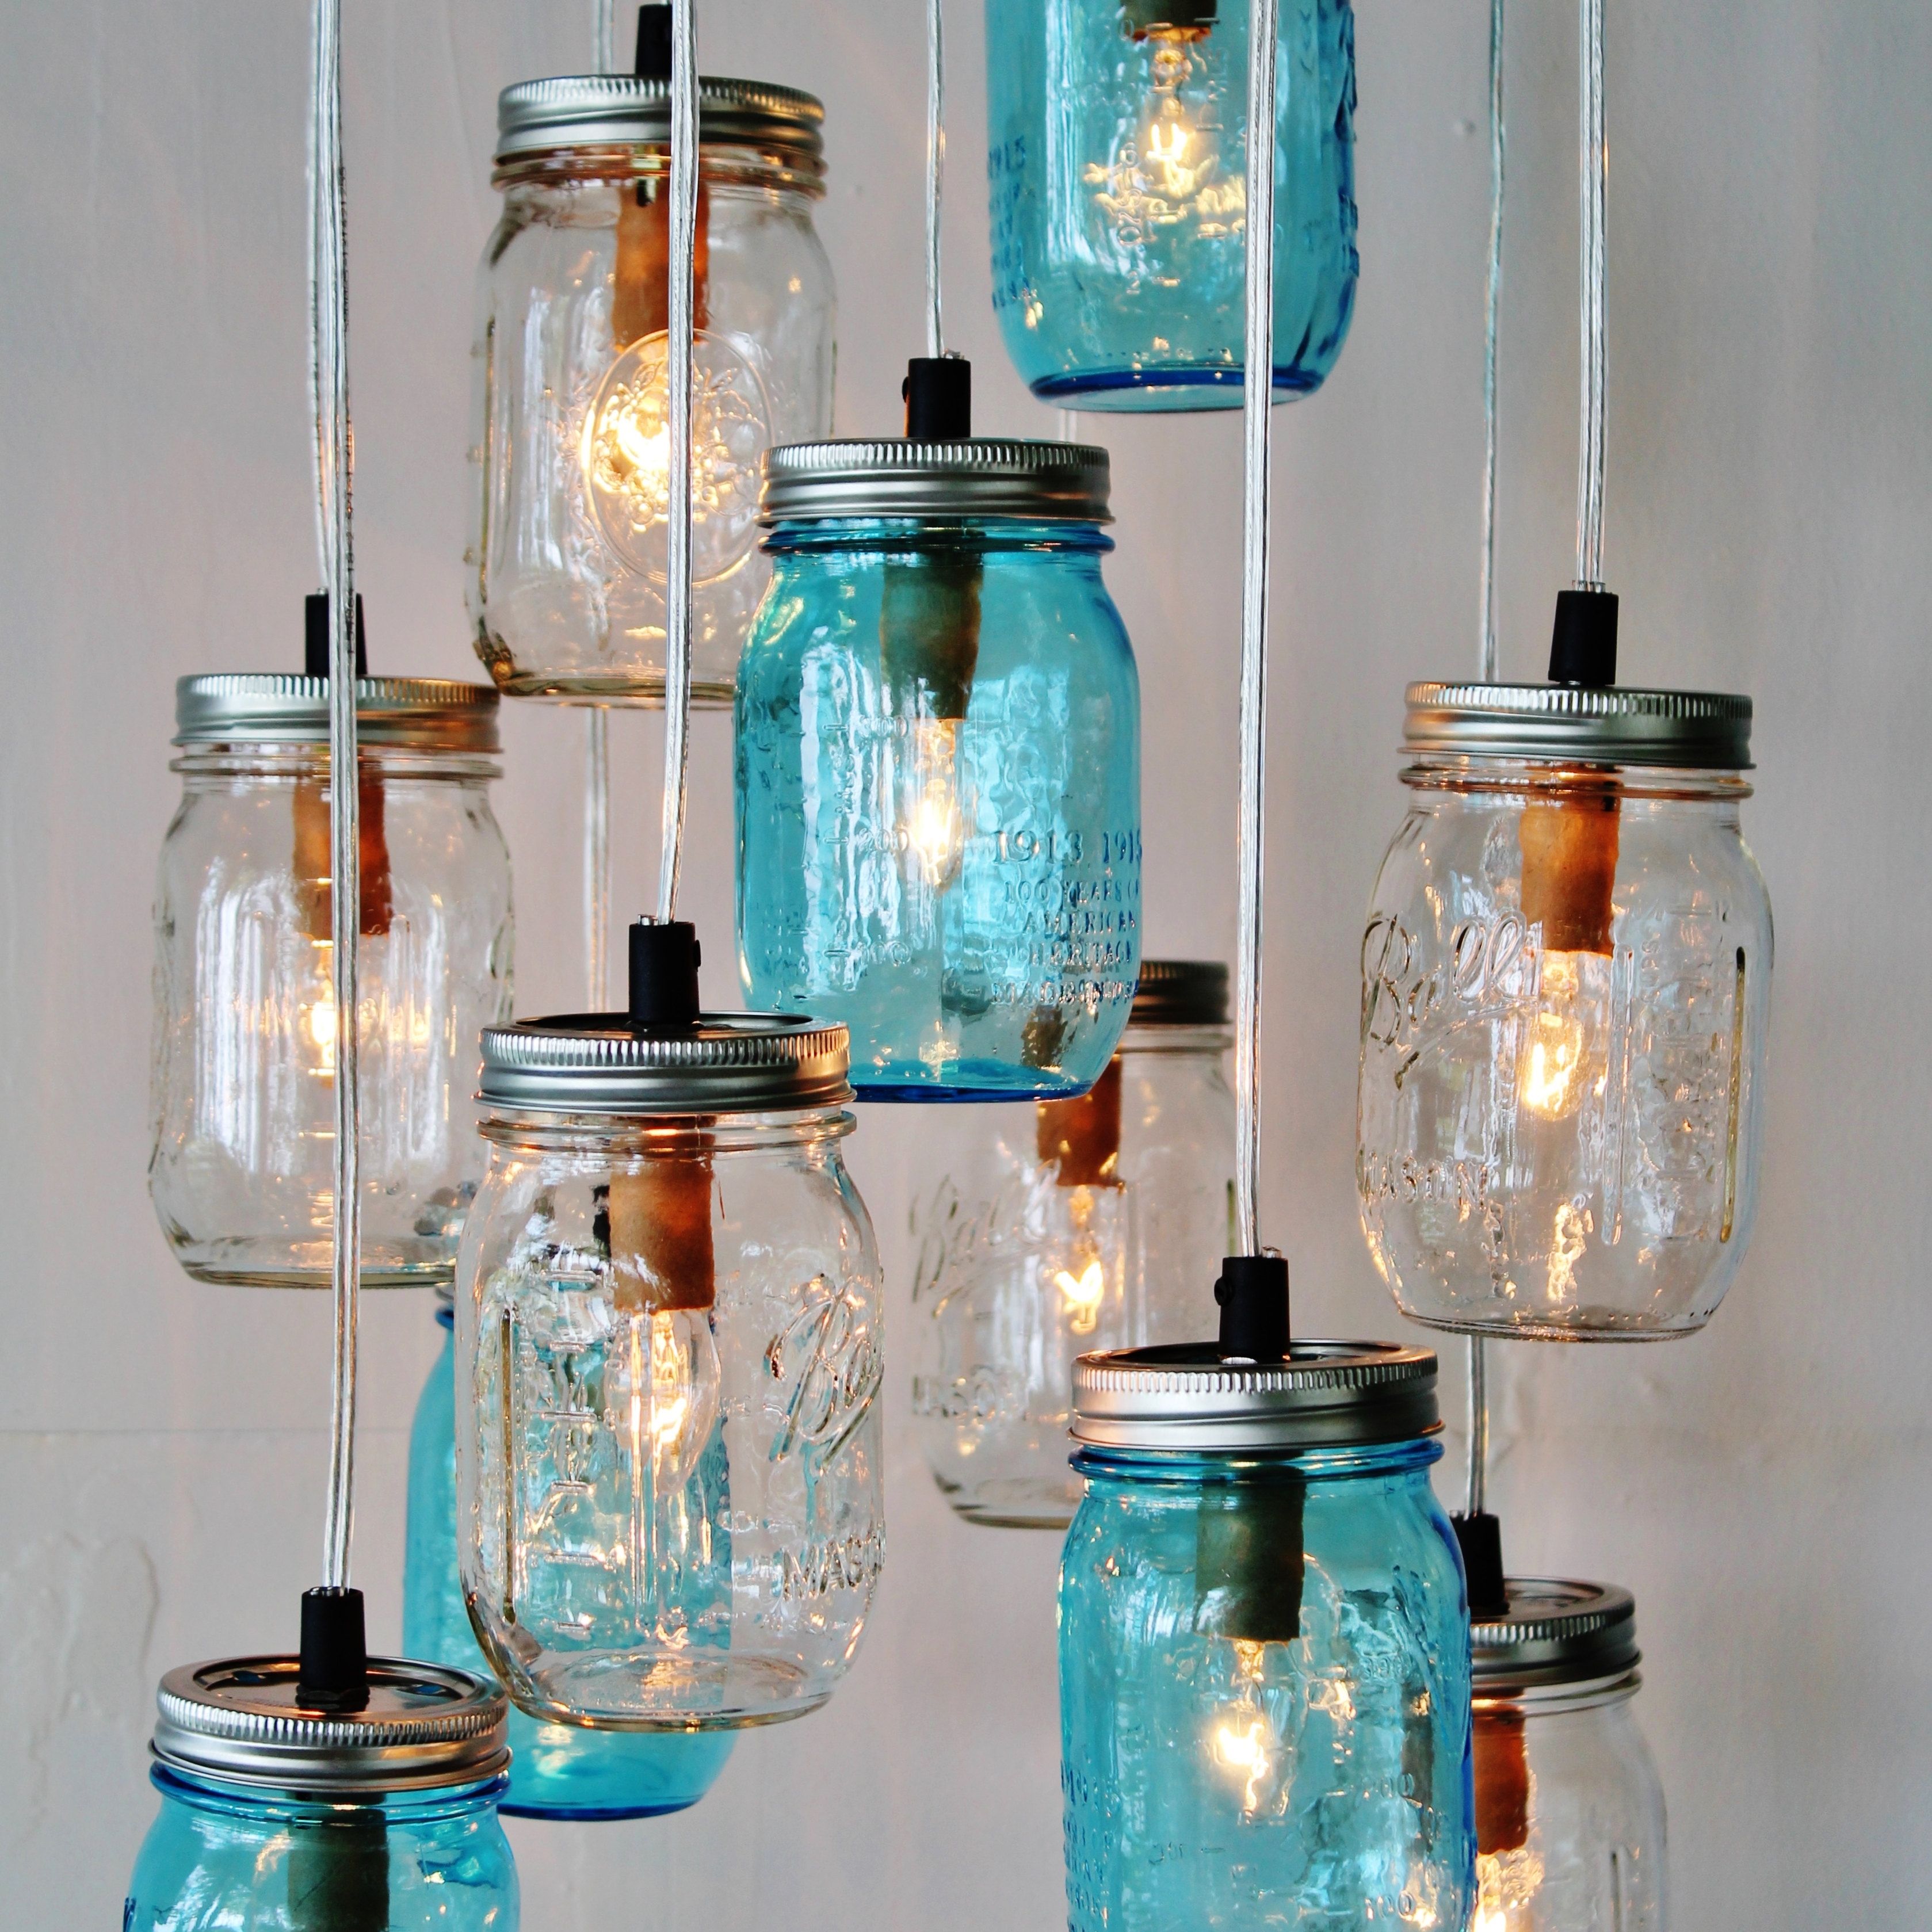 Modern Lighting Mason Jar Chandeliers And More Bootsngus Inside Turquoise Blue Glass Chandeliers (View 17 of 25)